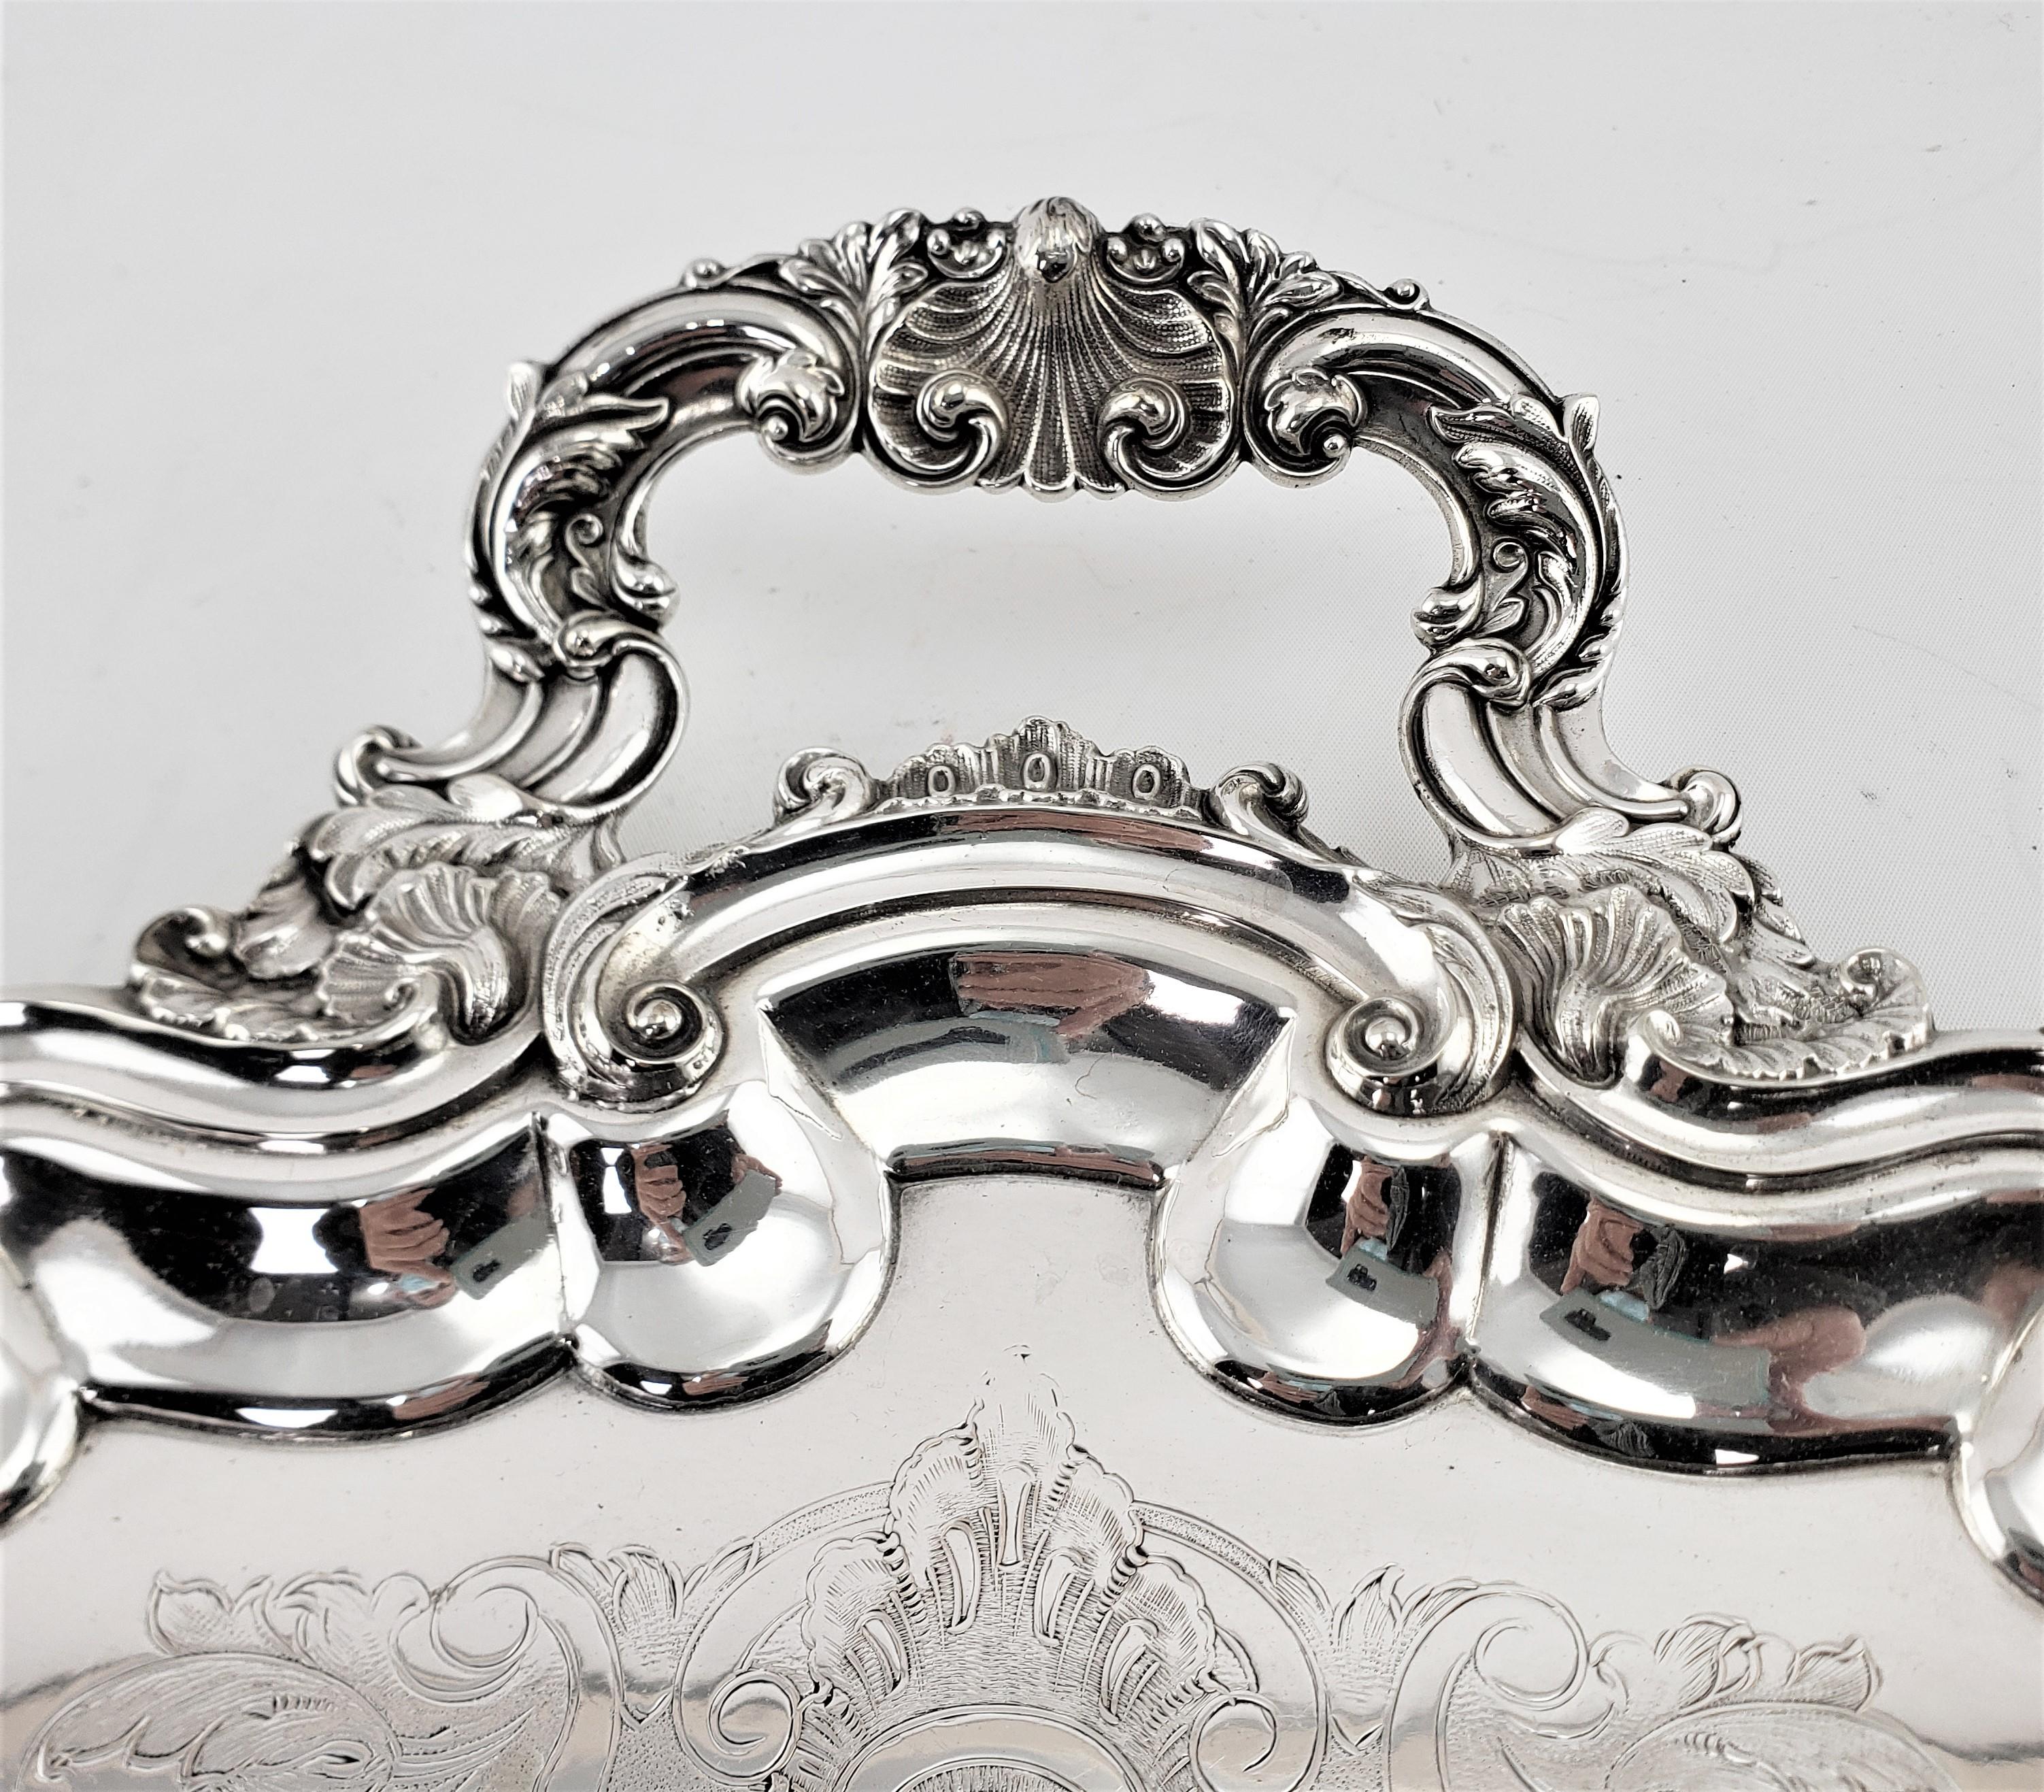 20th Century Large Antique Oval Silver Plated Serving Tray with Ornate Floral Decoration